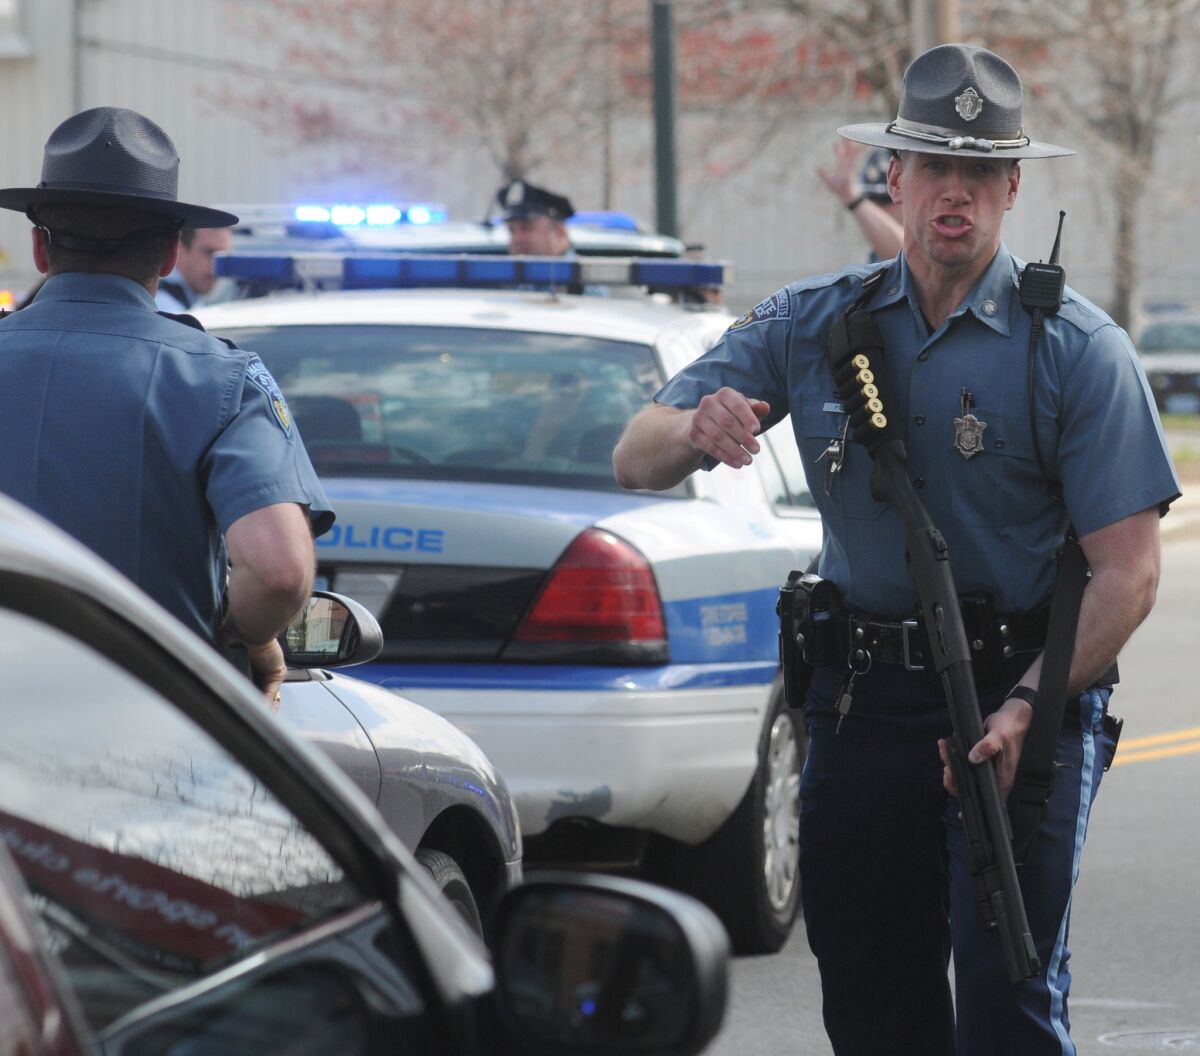 A Massachusett State Trooper pushes media back during a tense moment in the Watertown, Mass., manhunt for a suspect in the Boston Marathon bombings.